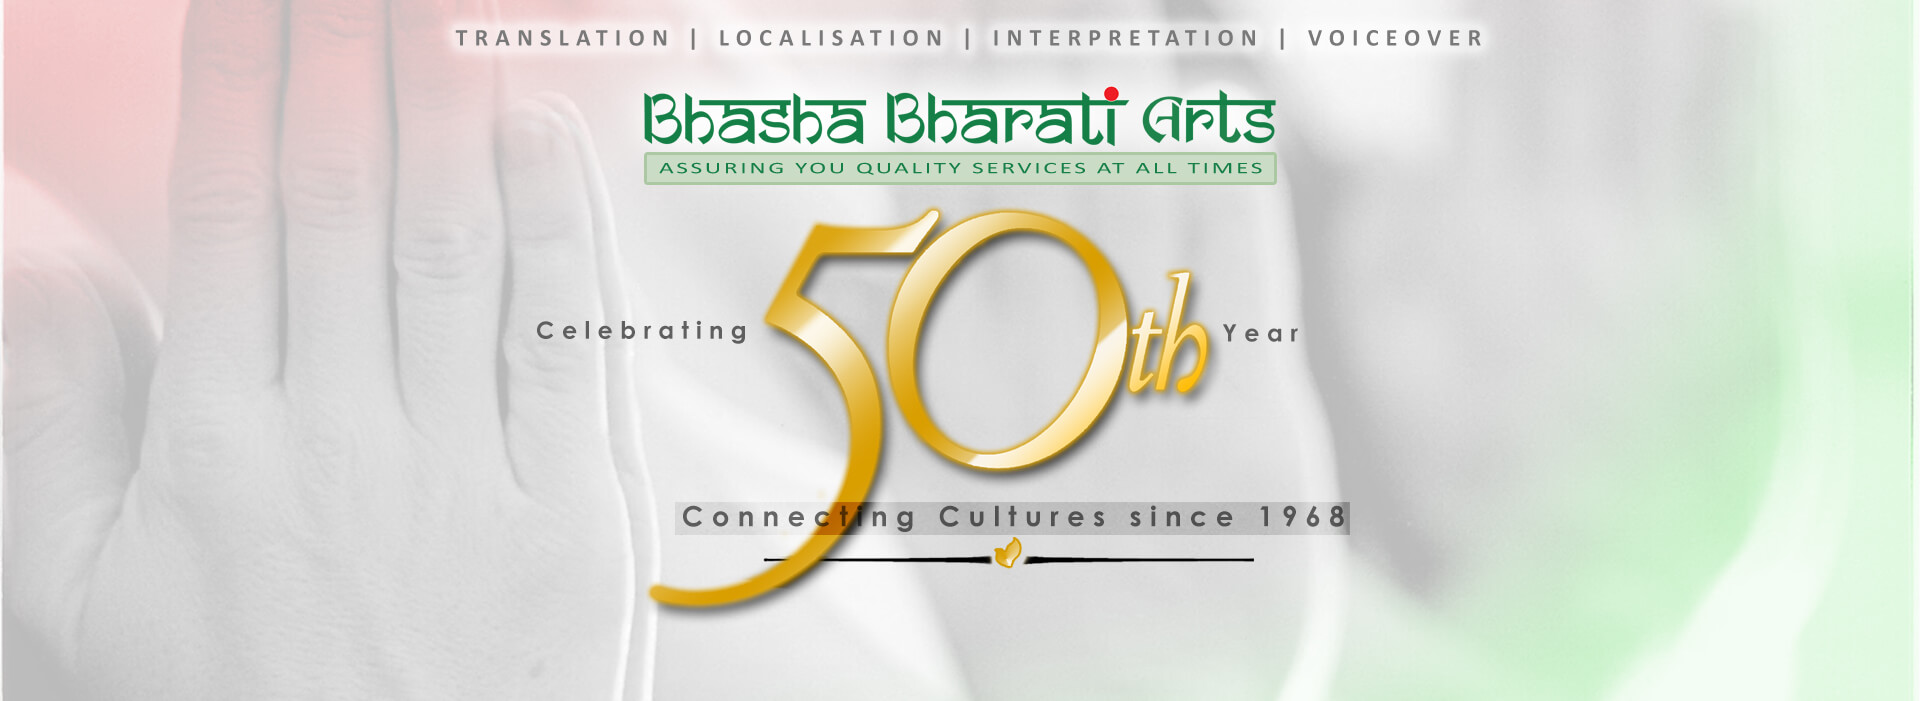 celebrating 50th year connecting cultures since 1968 - Translation Services in India